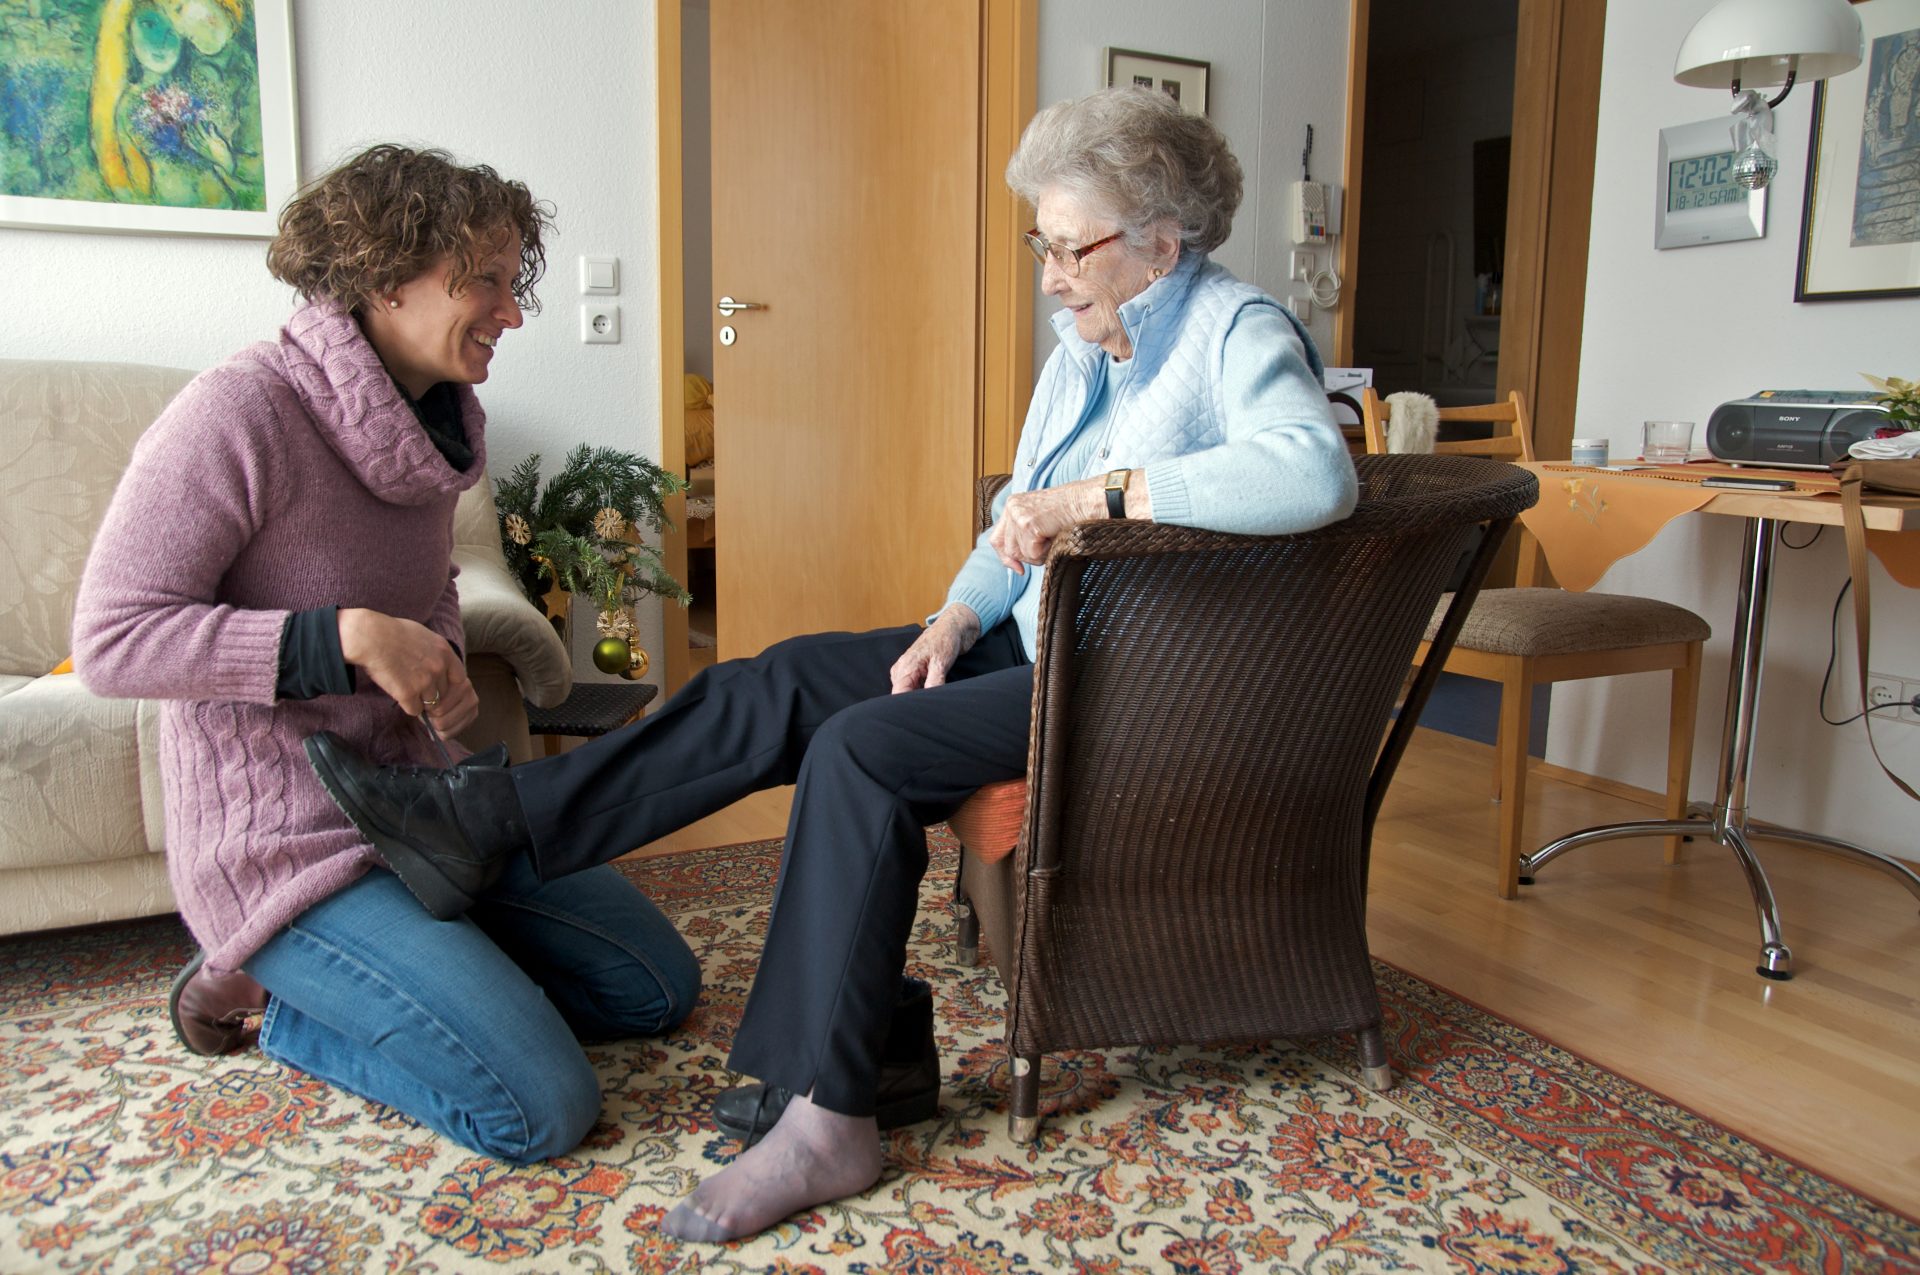 Elderly lady sitting in a chair receiving help putting her shoes on.